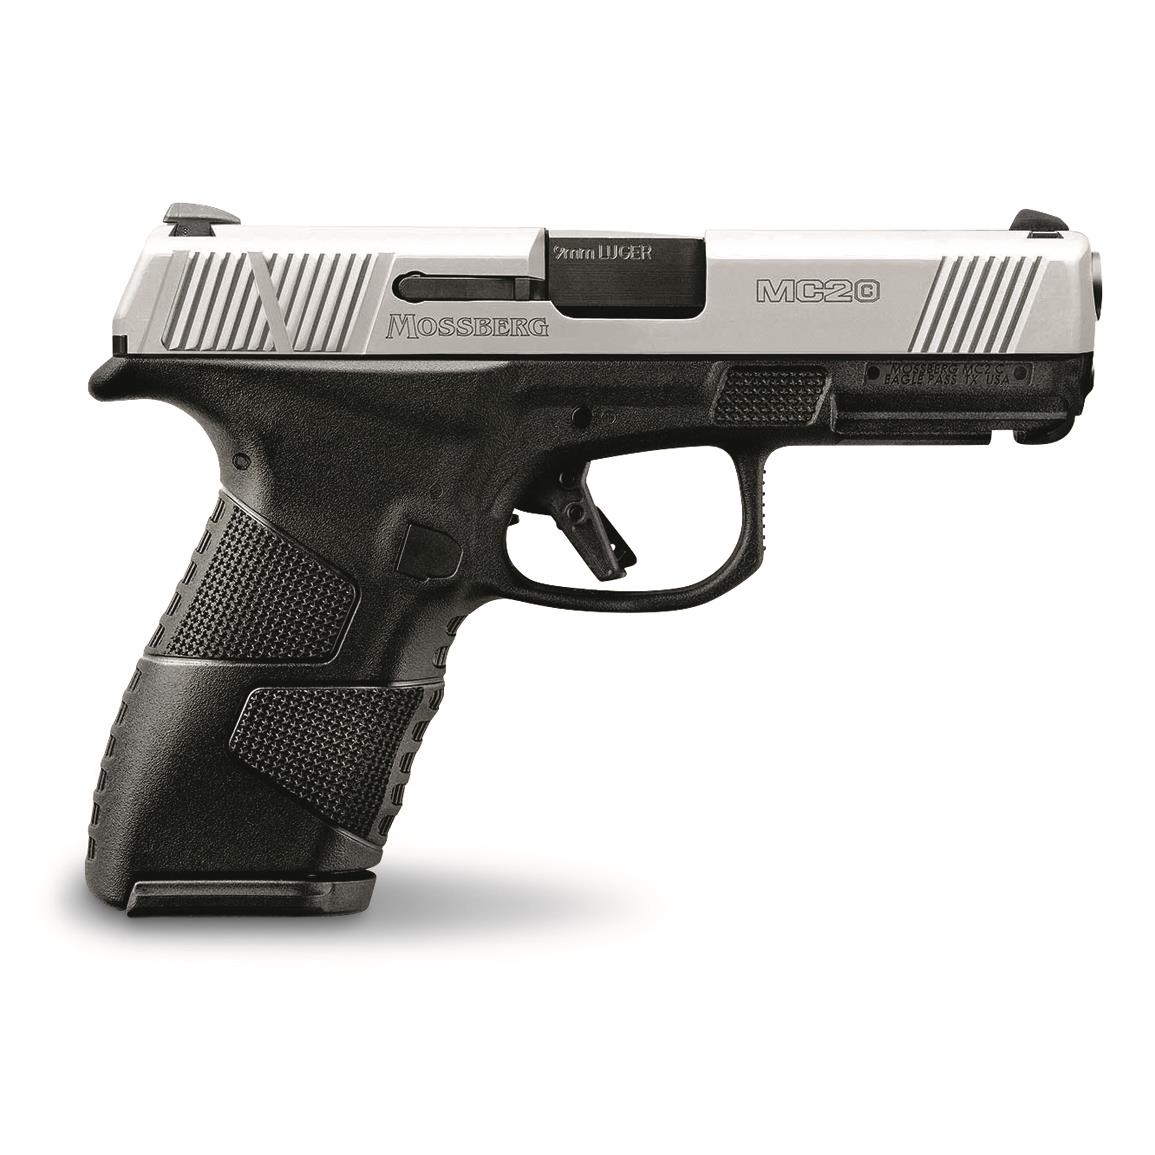 Mossberg MC2c Stainless Two-Tone, Semi-automatic, 9mm, 3.9" Barrel, 15+1 Rounds